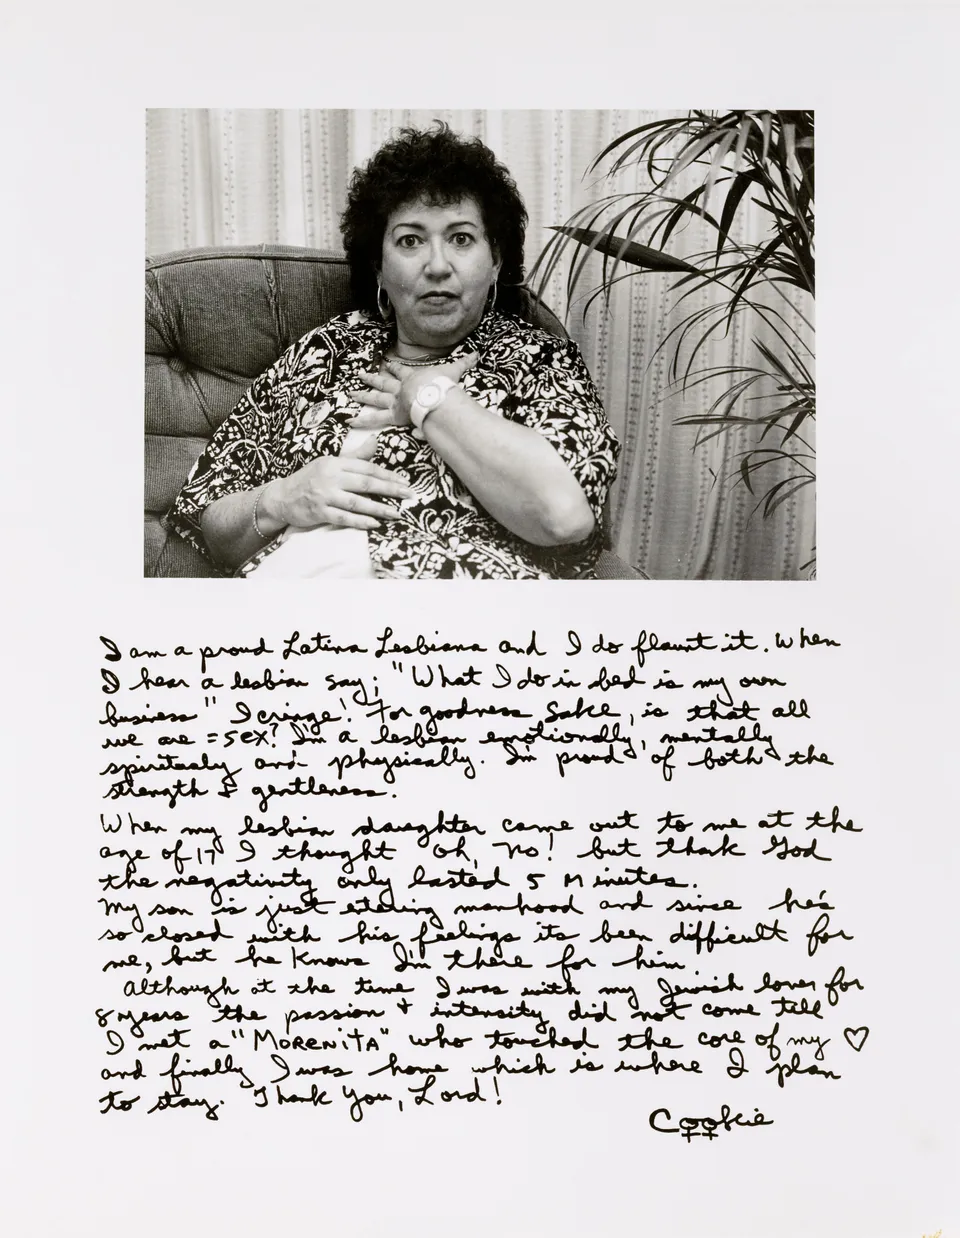 Cookie, from the series Latina Lesbians Smithsonian American Art Museum